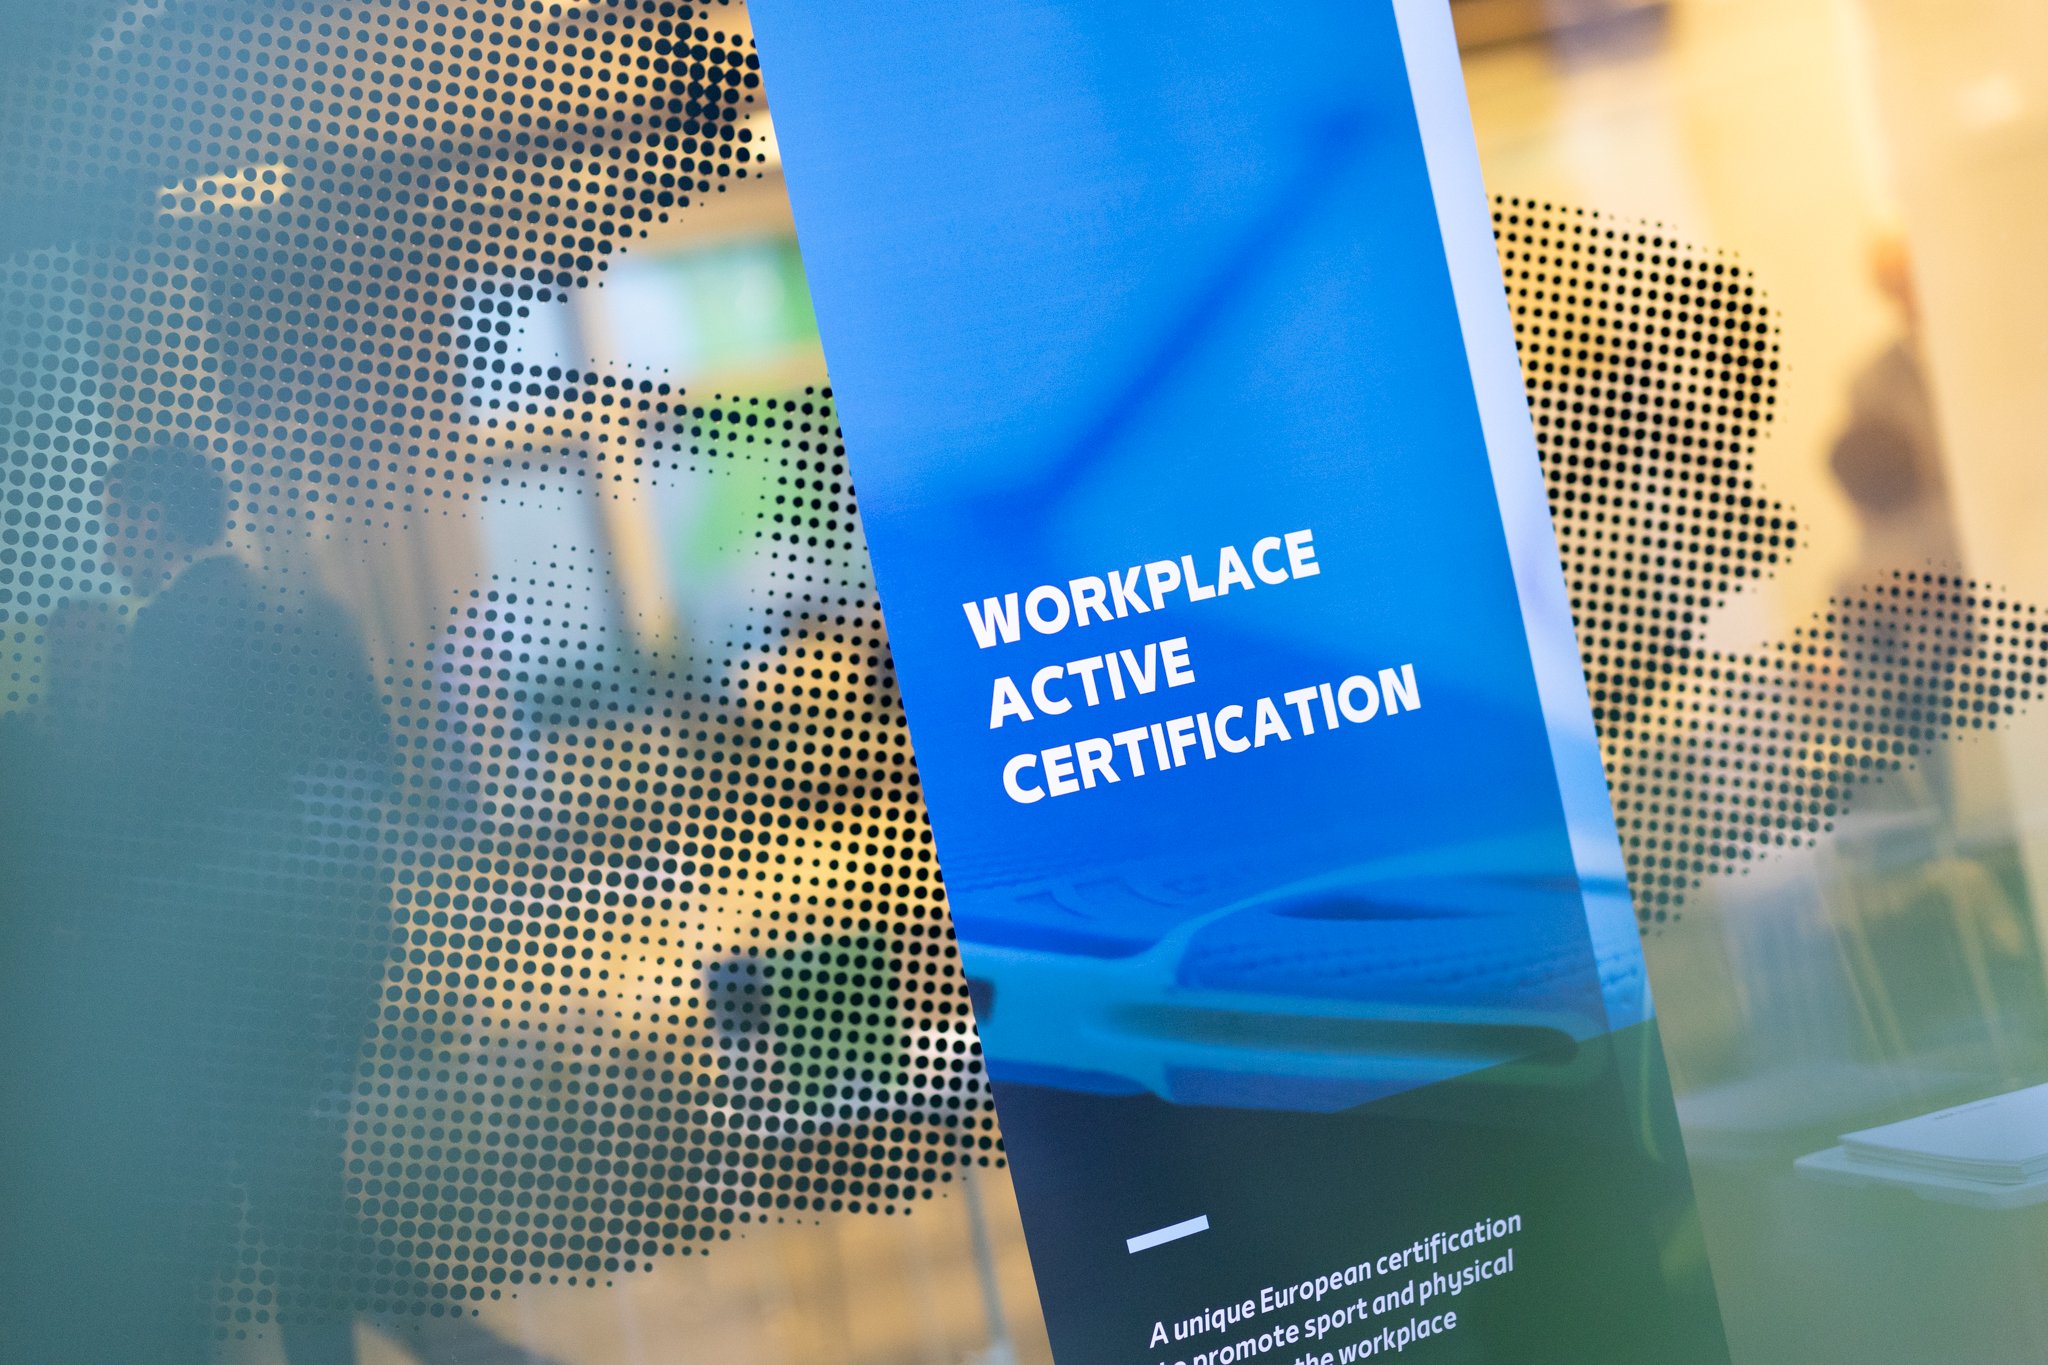 Workplace Active Certification 025.jpg